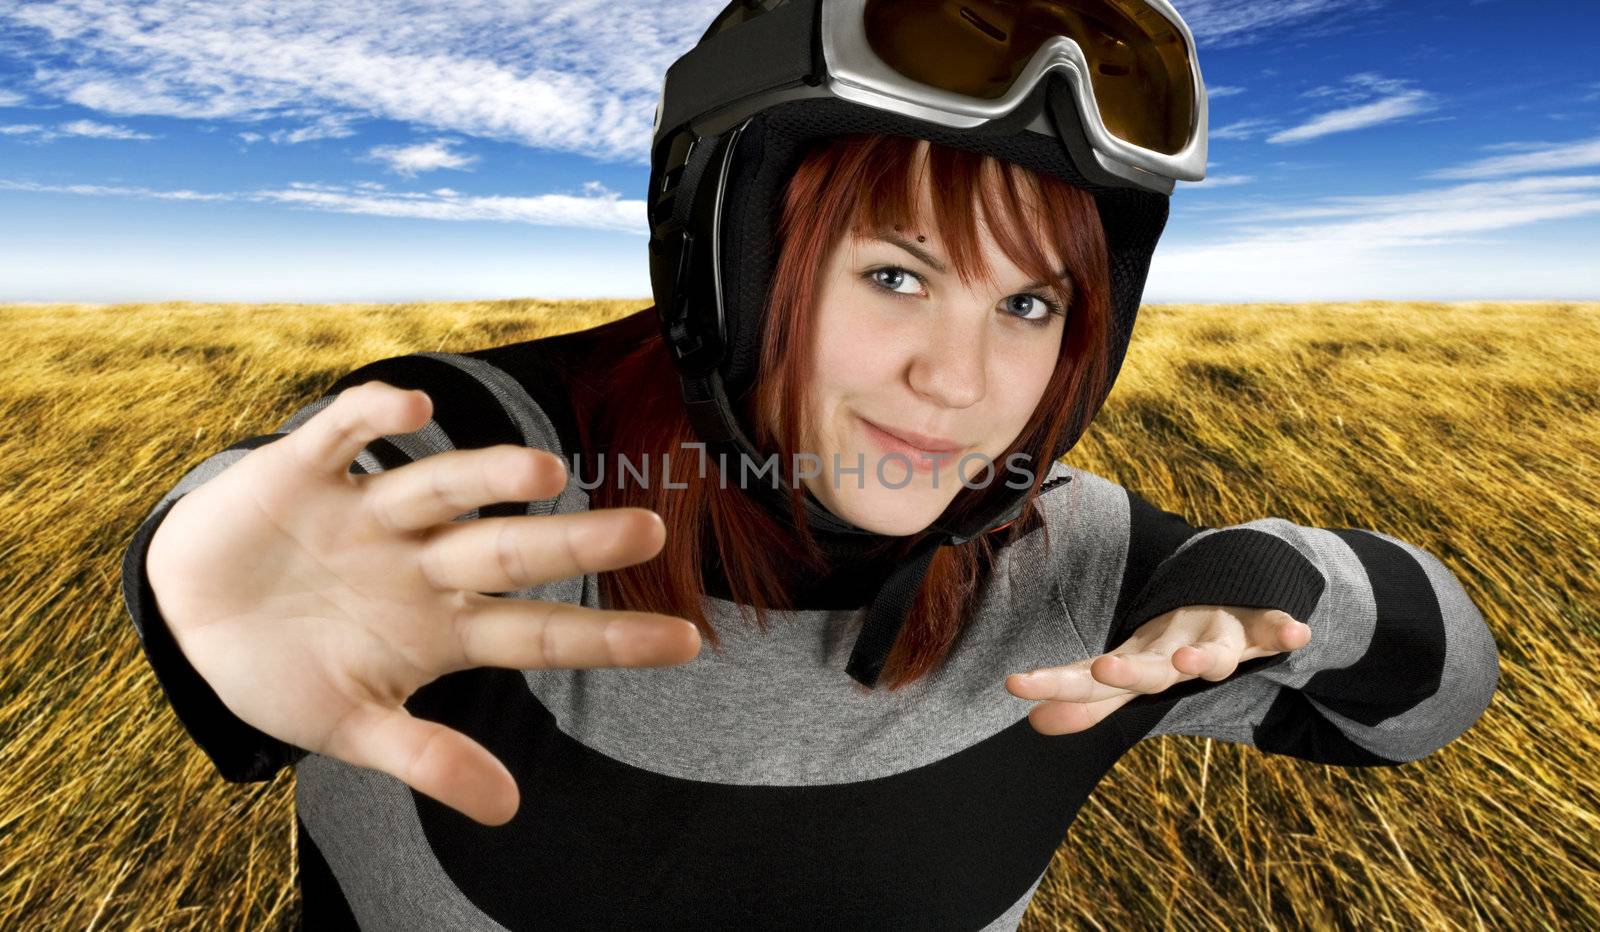 Cute girl freely snowboarding in a blue sky.

Studio shot, composite.